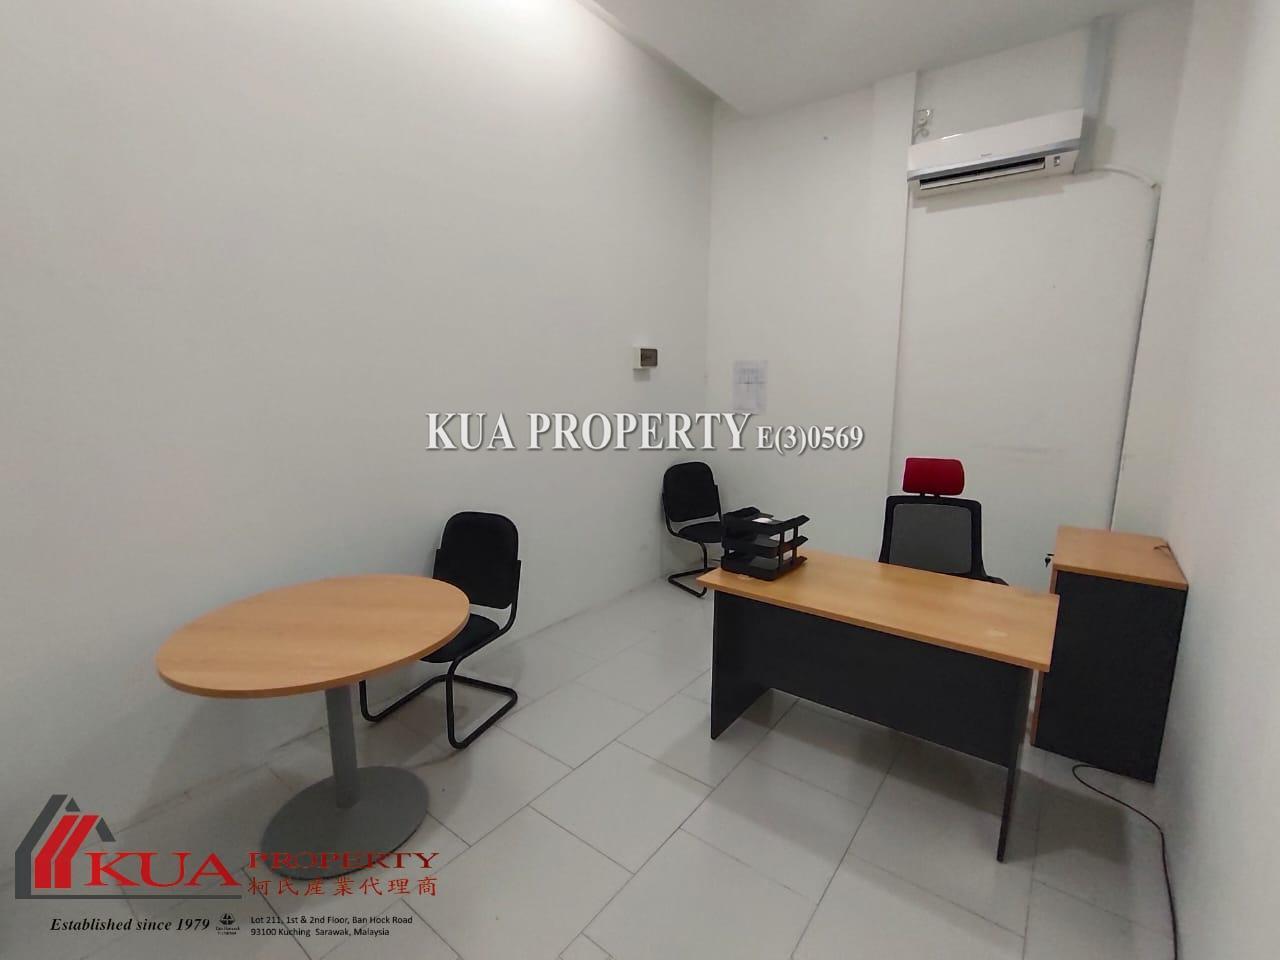 First Floor Private Studio Office For Rent! at Laksamana Cheng Ho, Kuching